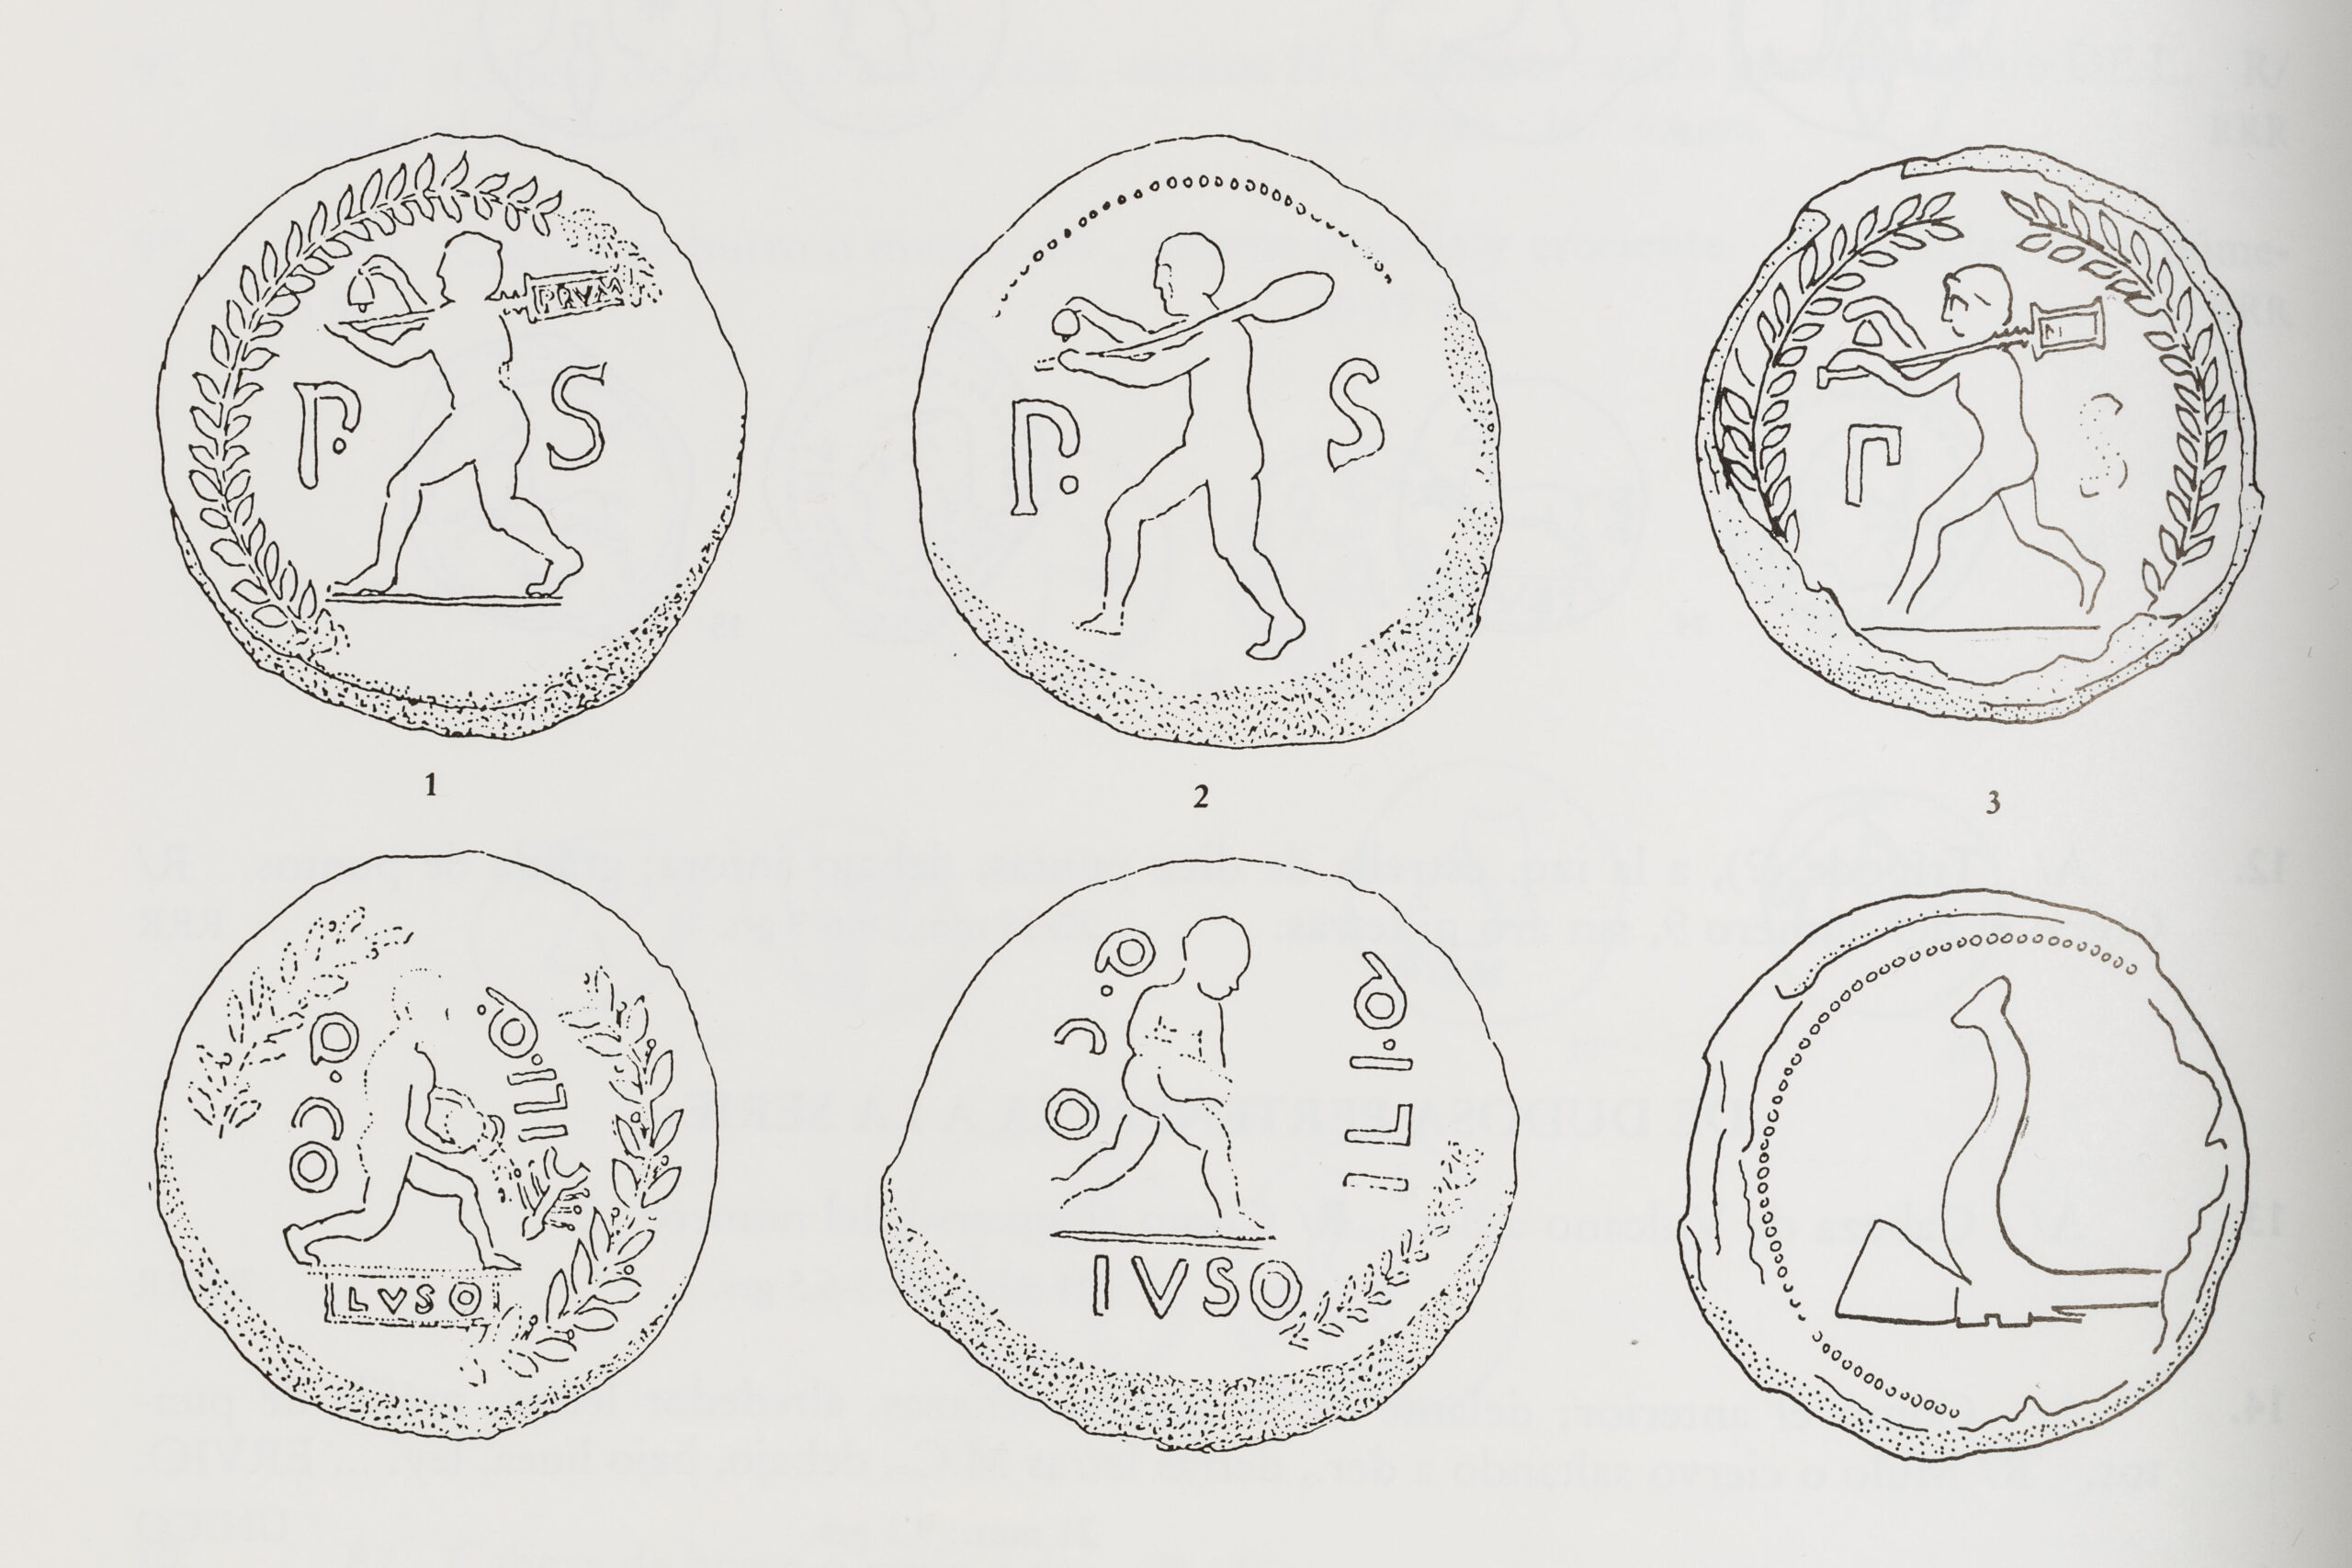 Fig. 3: Tokens from the series de las minas with P · S and man with the “shovel.” Casariego 1987, p. 26, nos. 1–3.